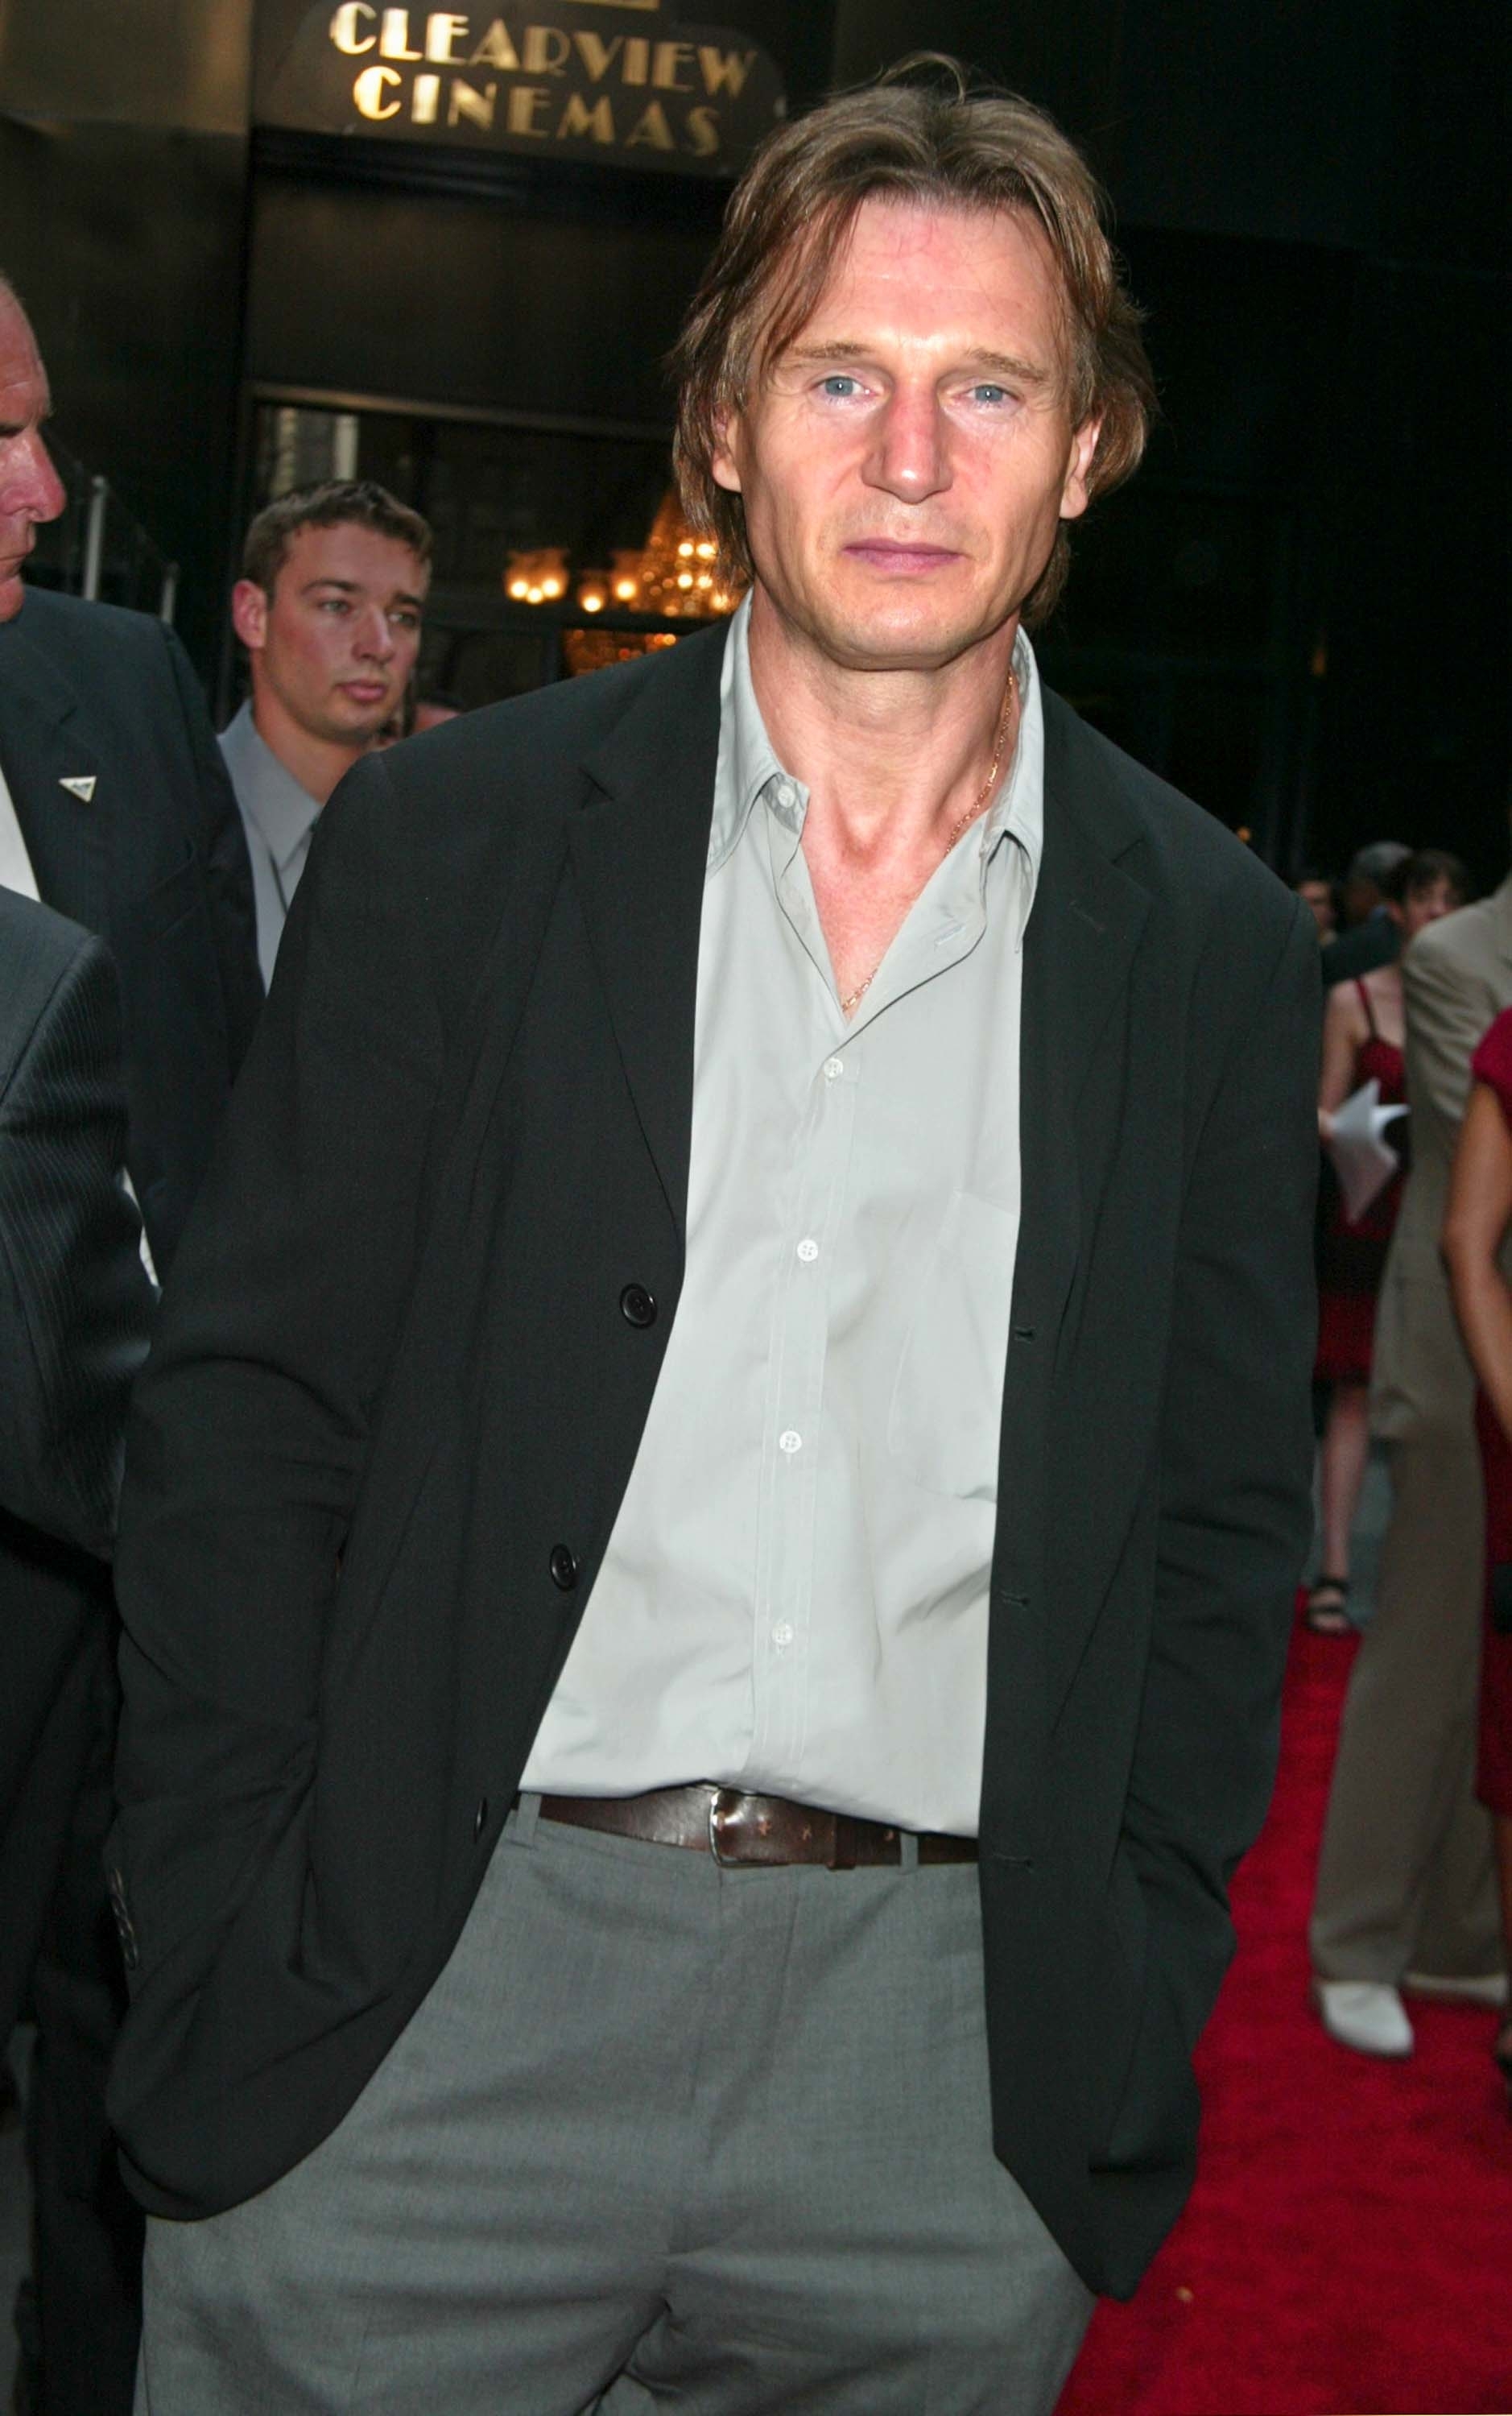 Man in a black blazer and open-collar shirt at a premiere event